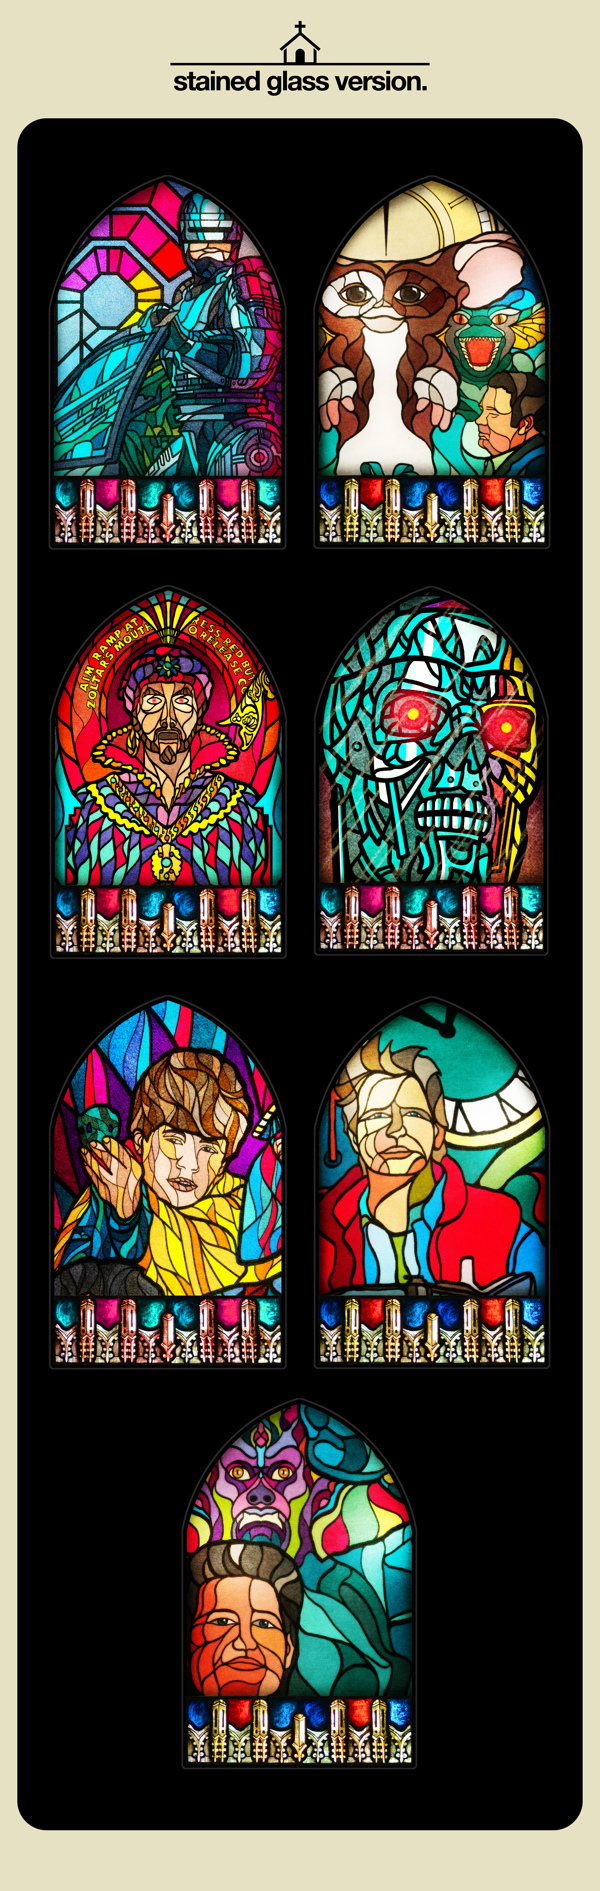 7Stained Glass design